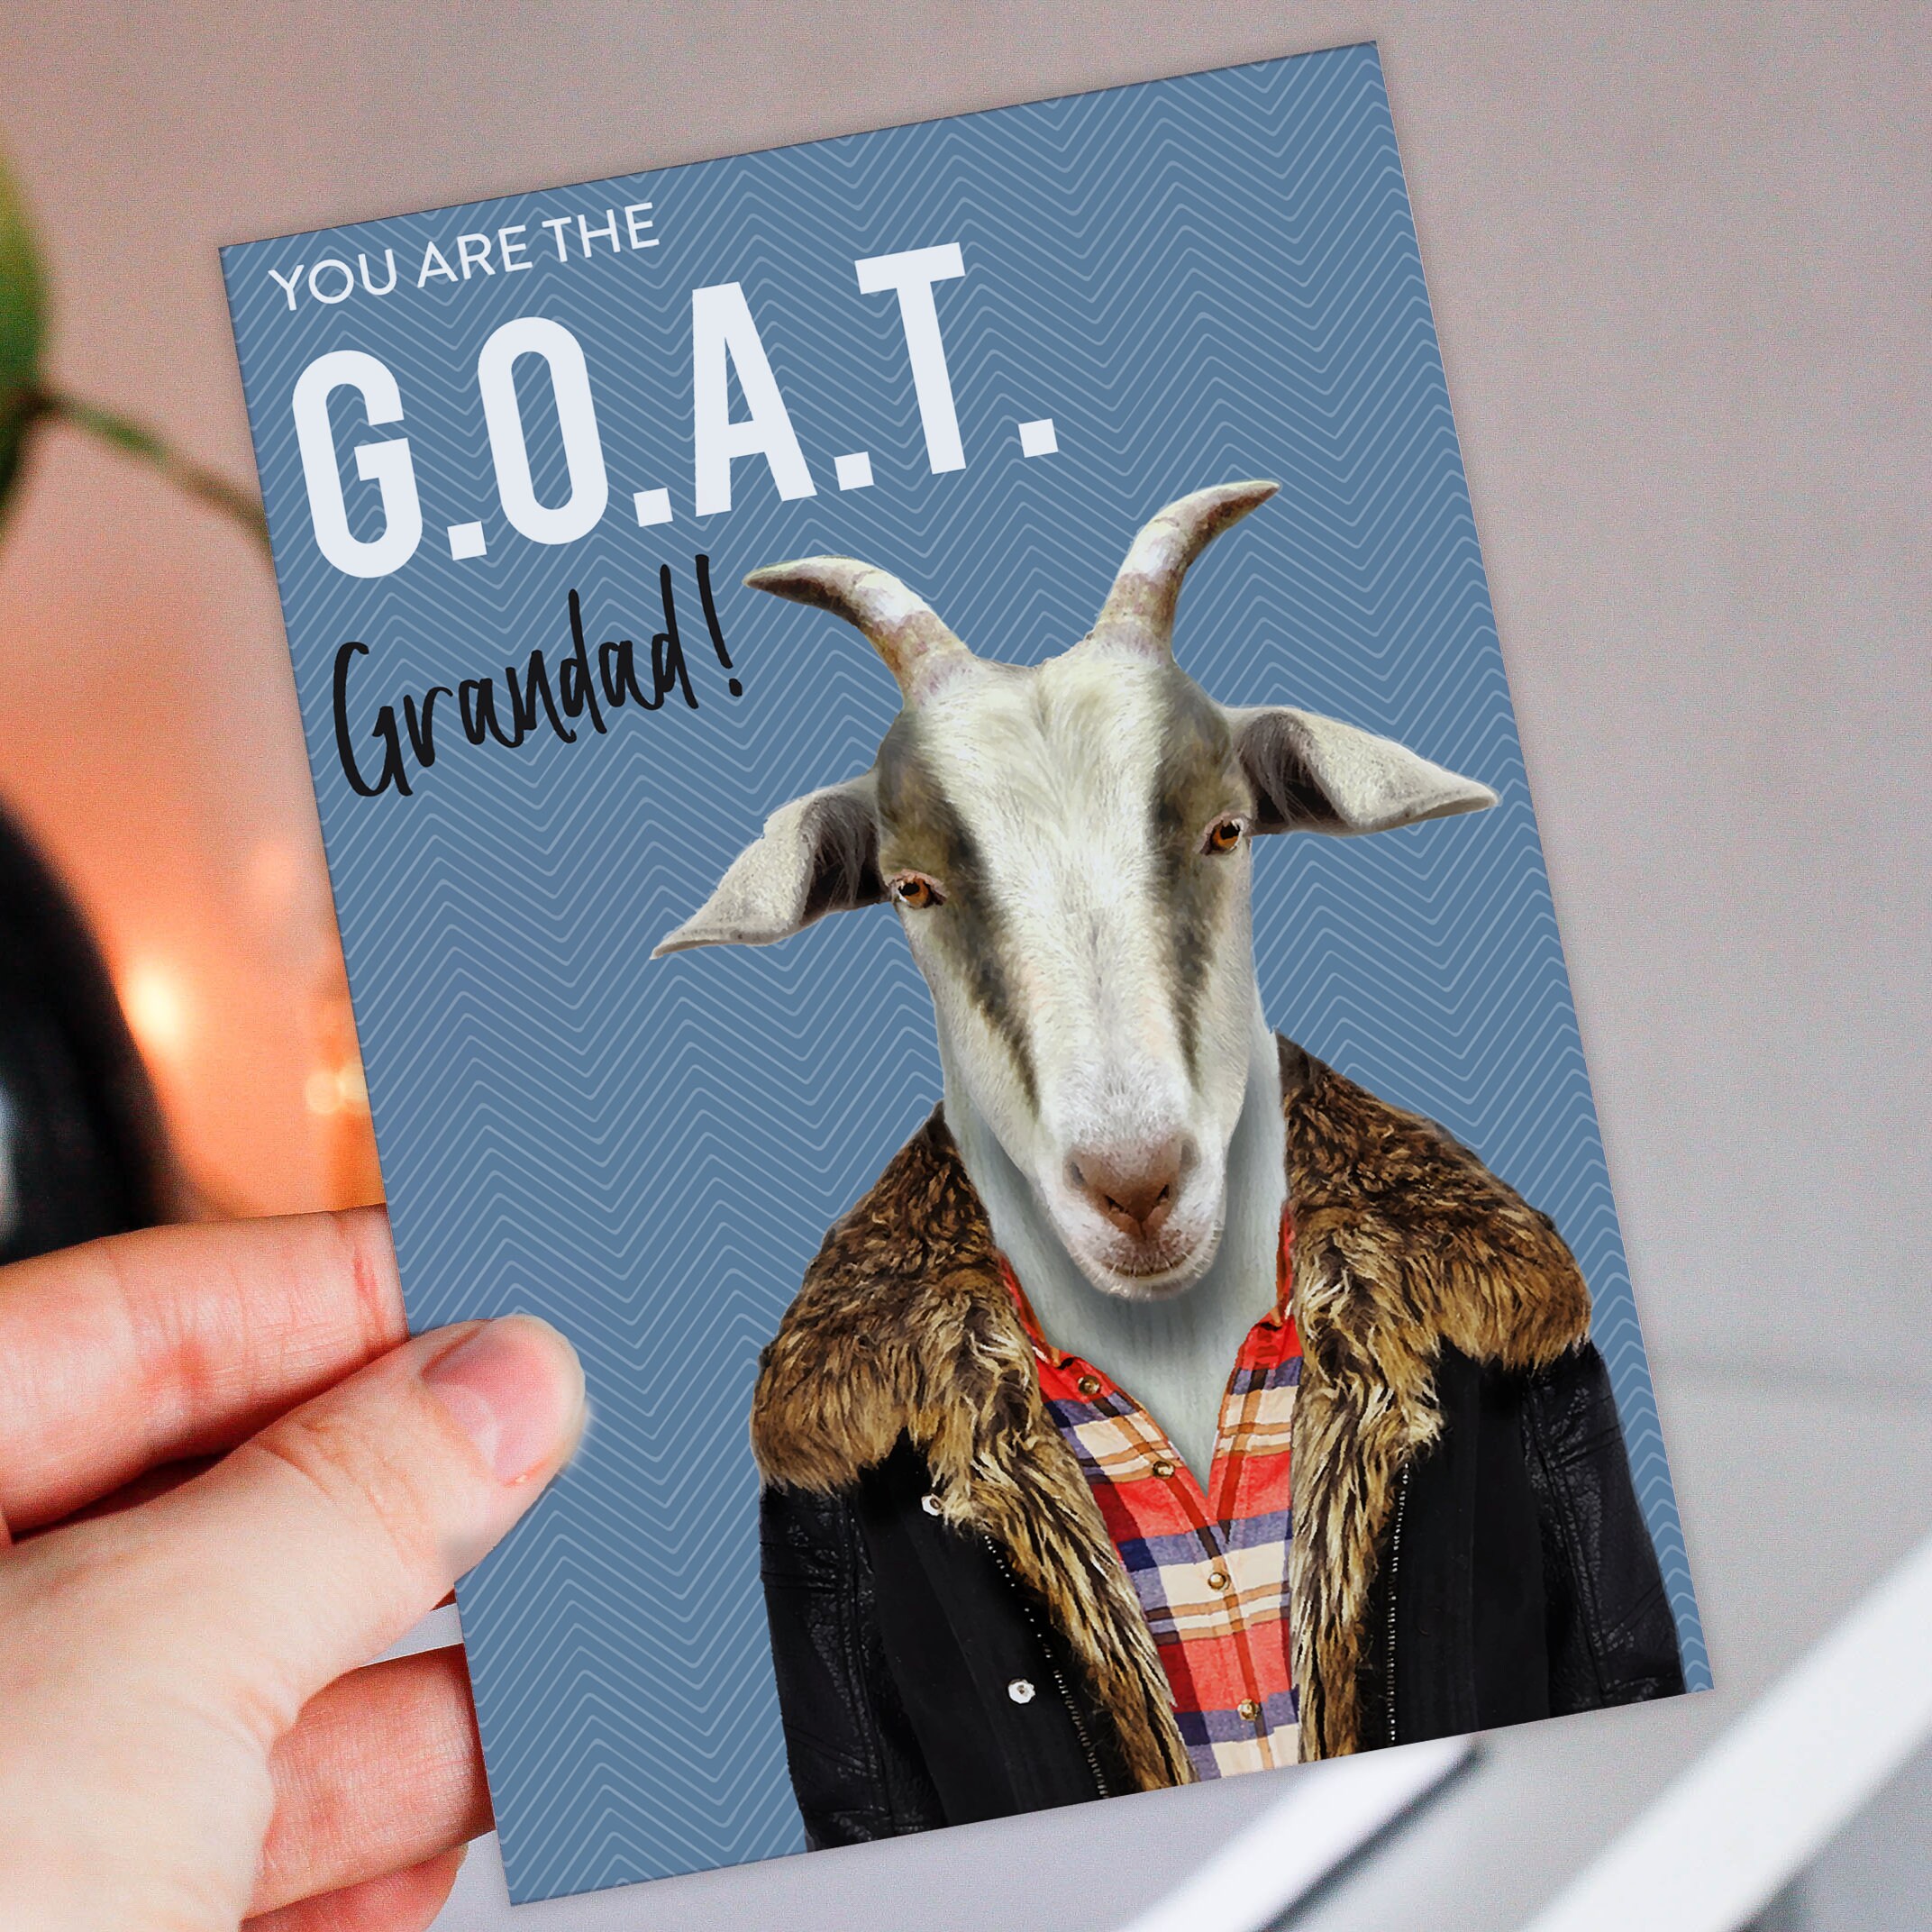 Greatest of All Time G.O.A.T Grandad Goat in Clothes Birthday Card for  Grandad, Grandfather animalyser size A6/a5/a4/square 6x6 